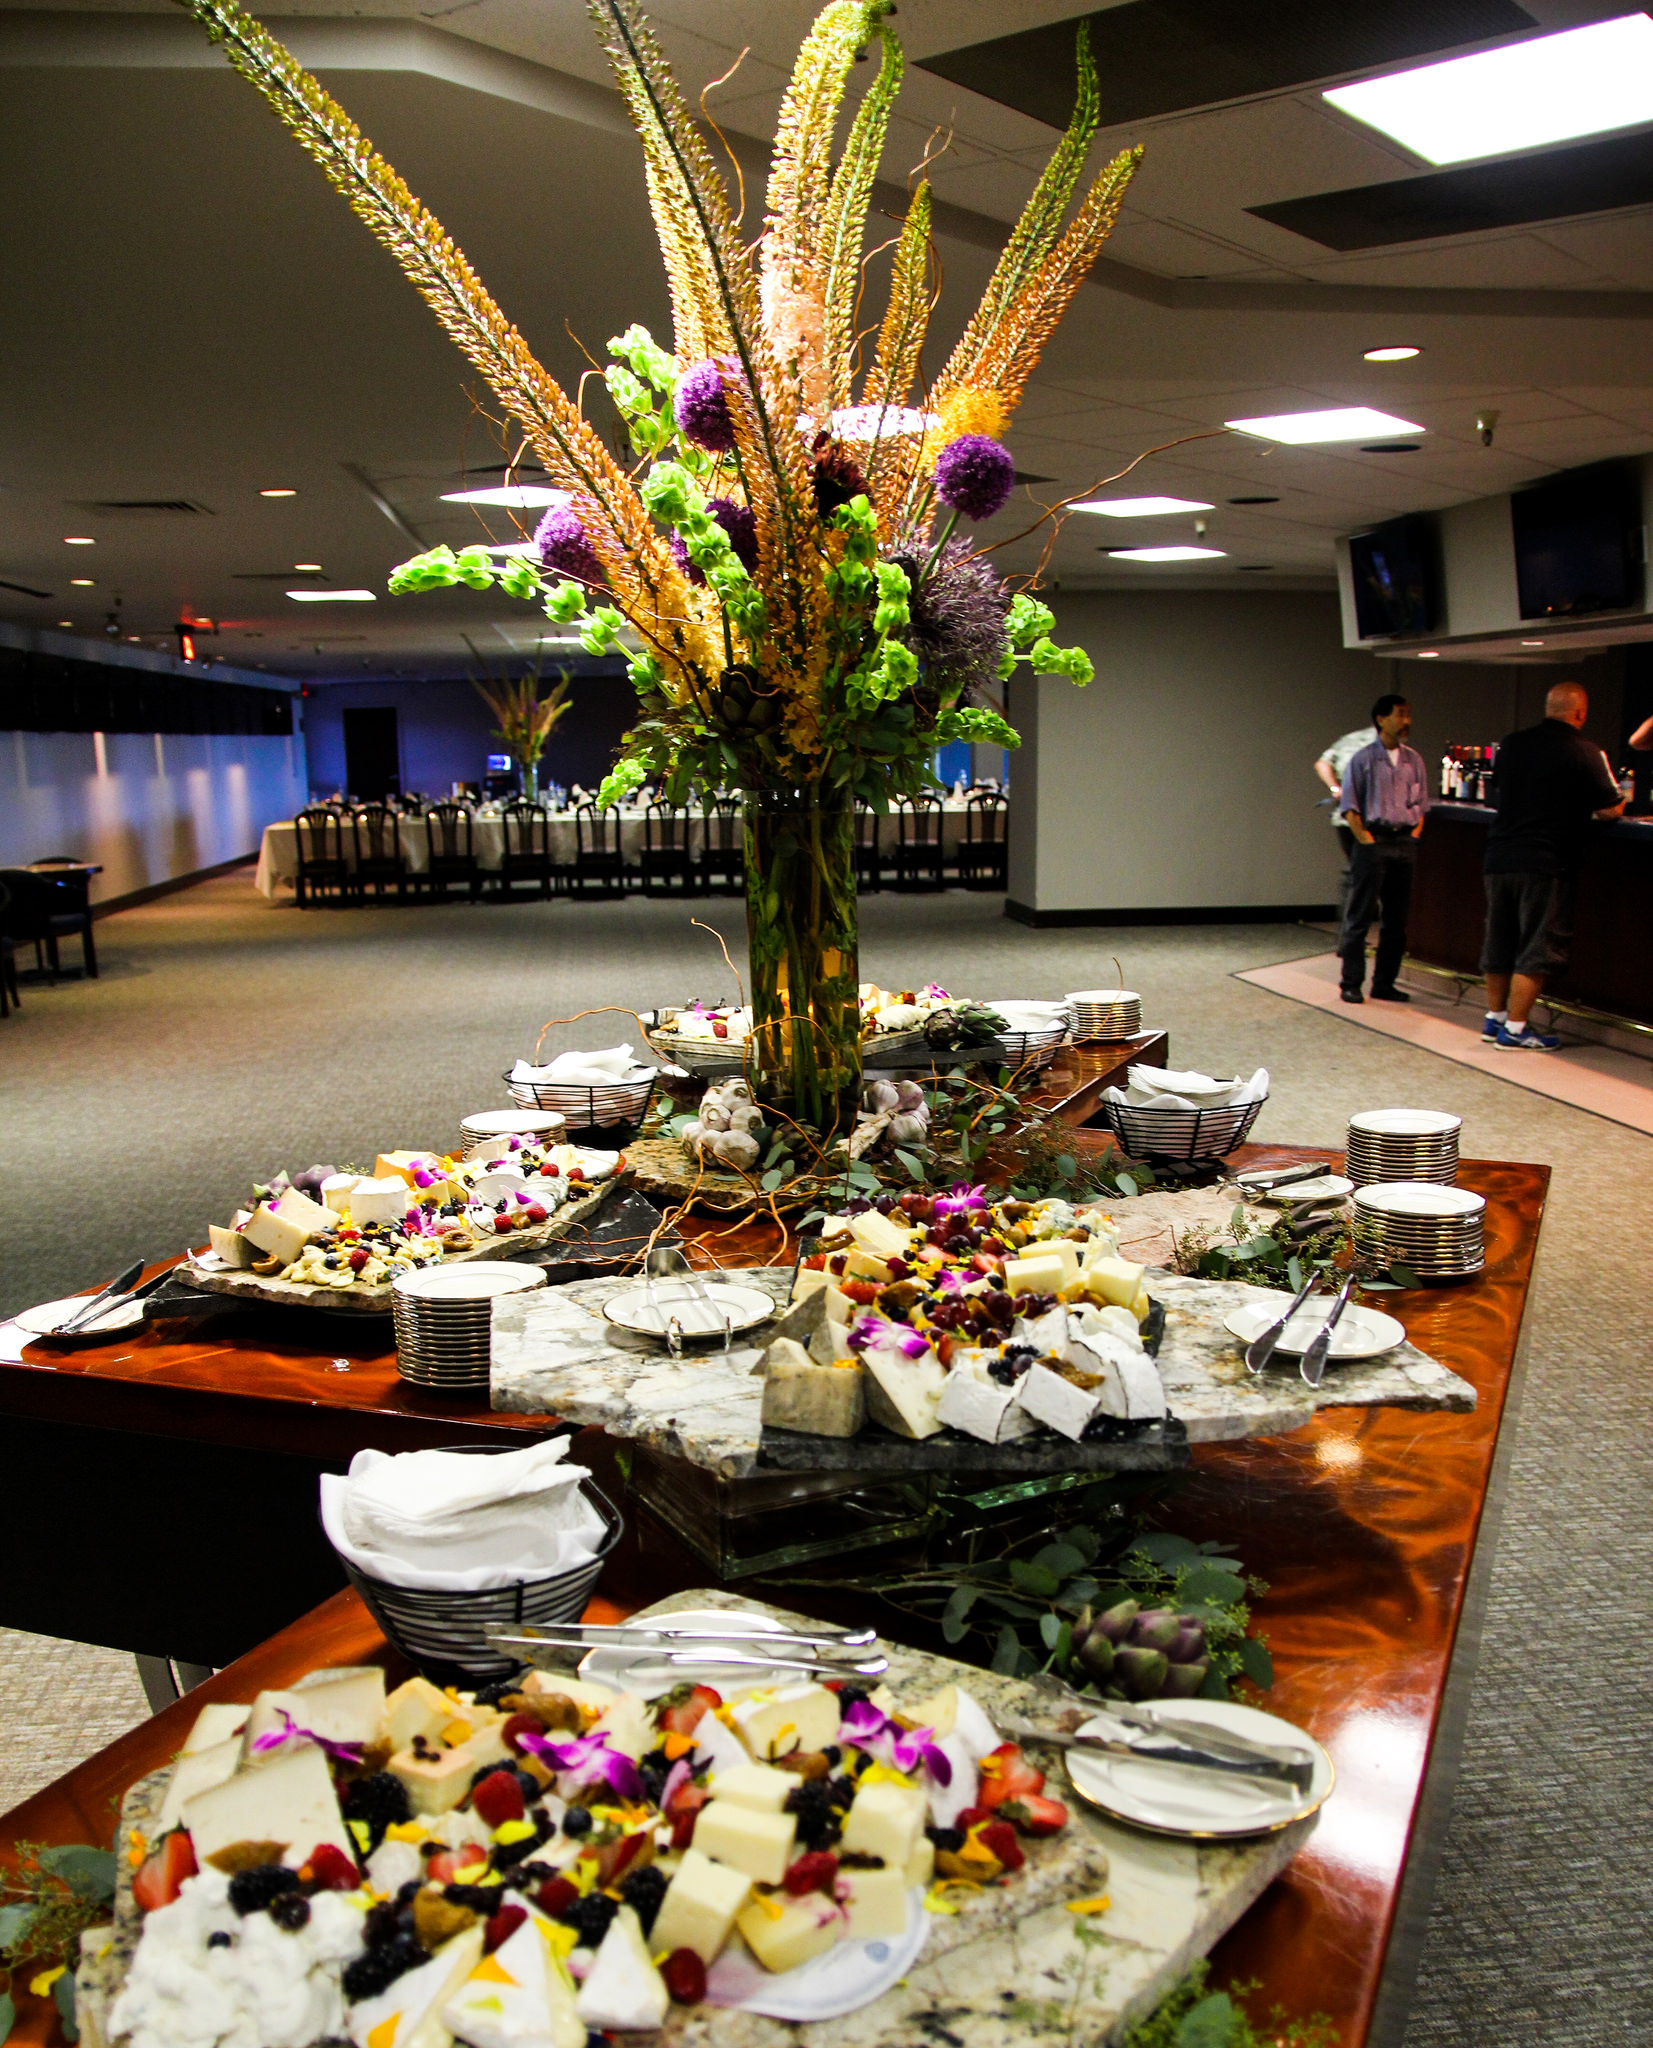 Large table of food and large flower arrangement